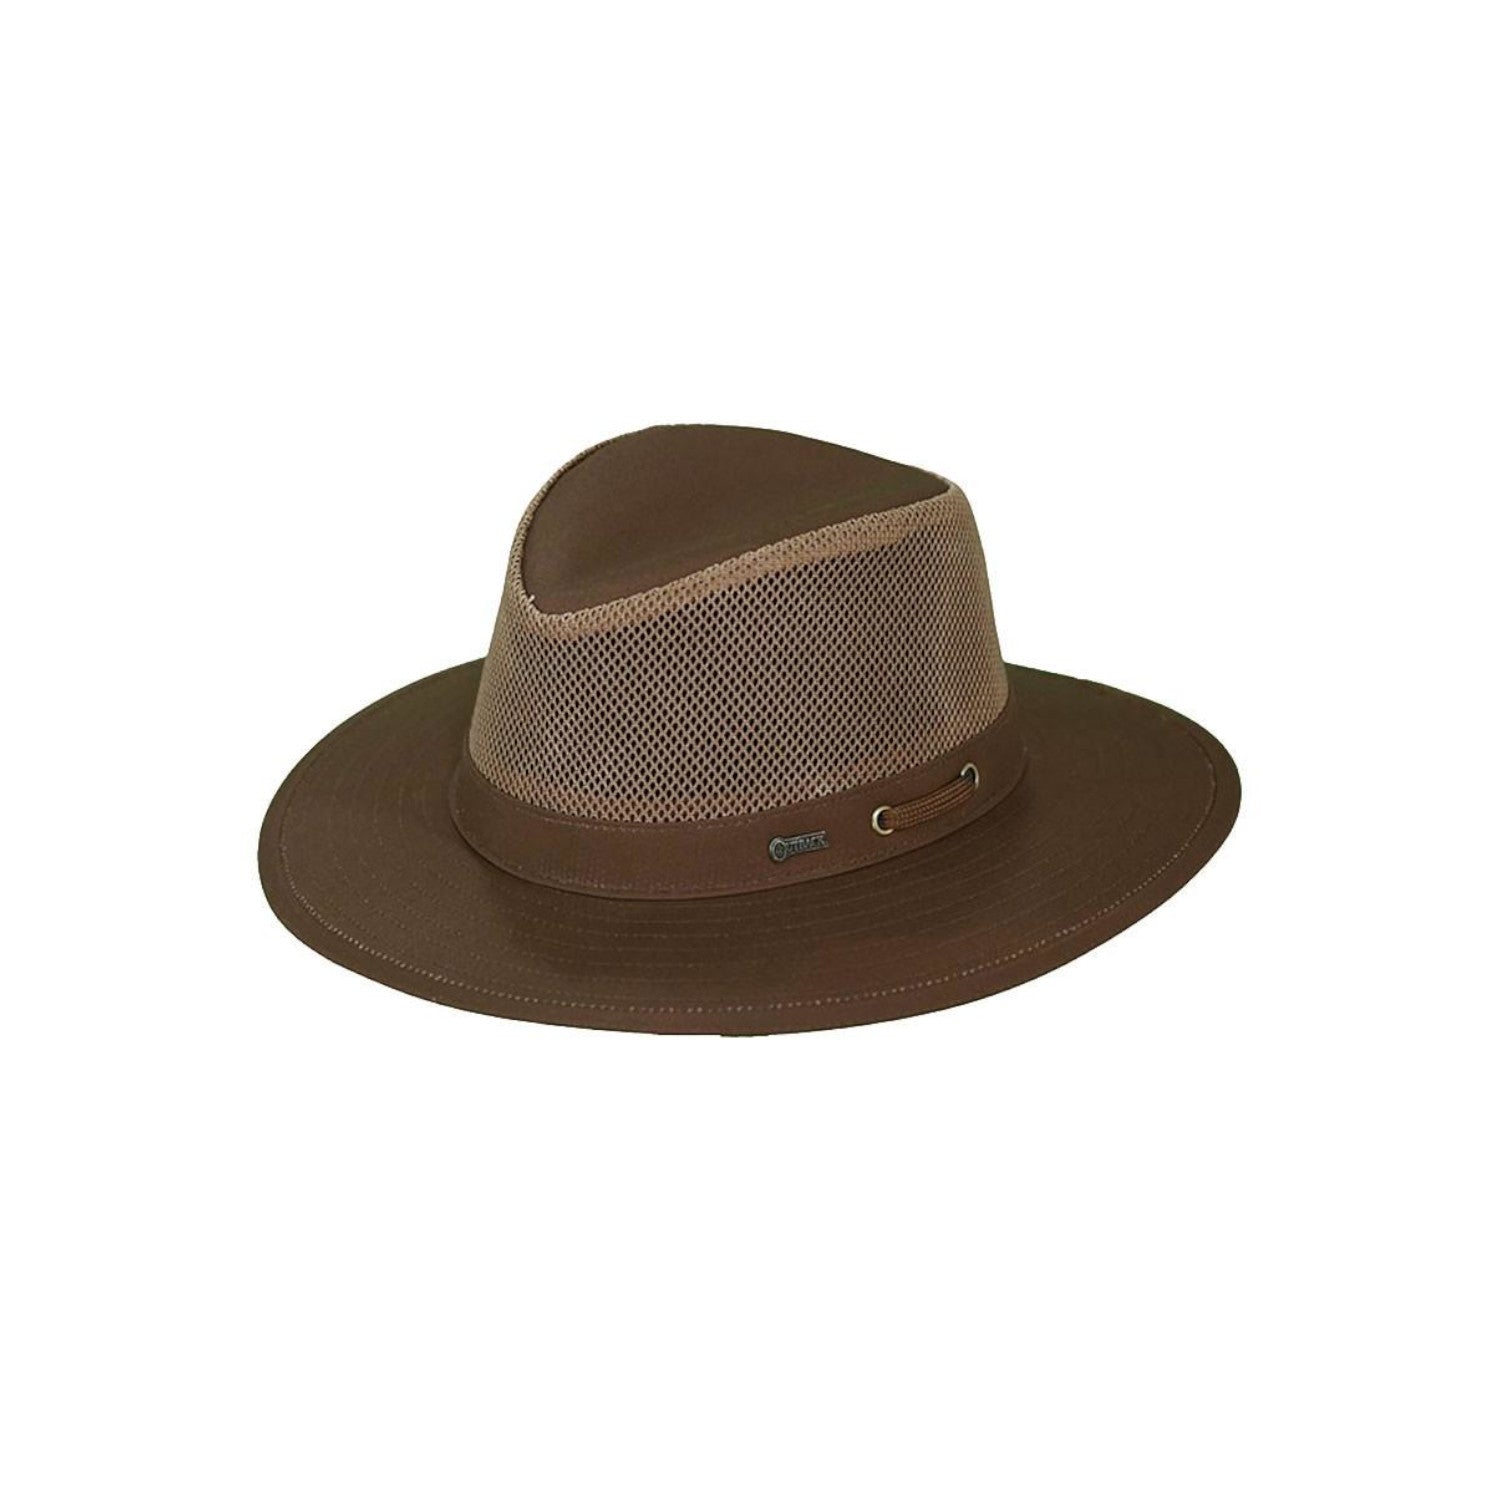 Outback Canvas River Guide with Mesh Hat